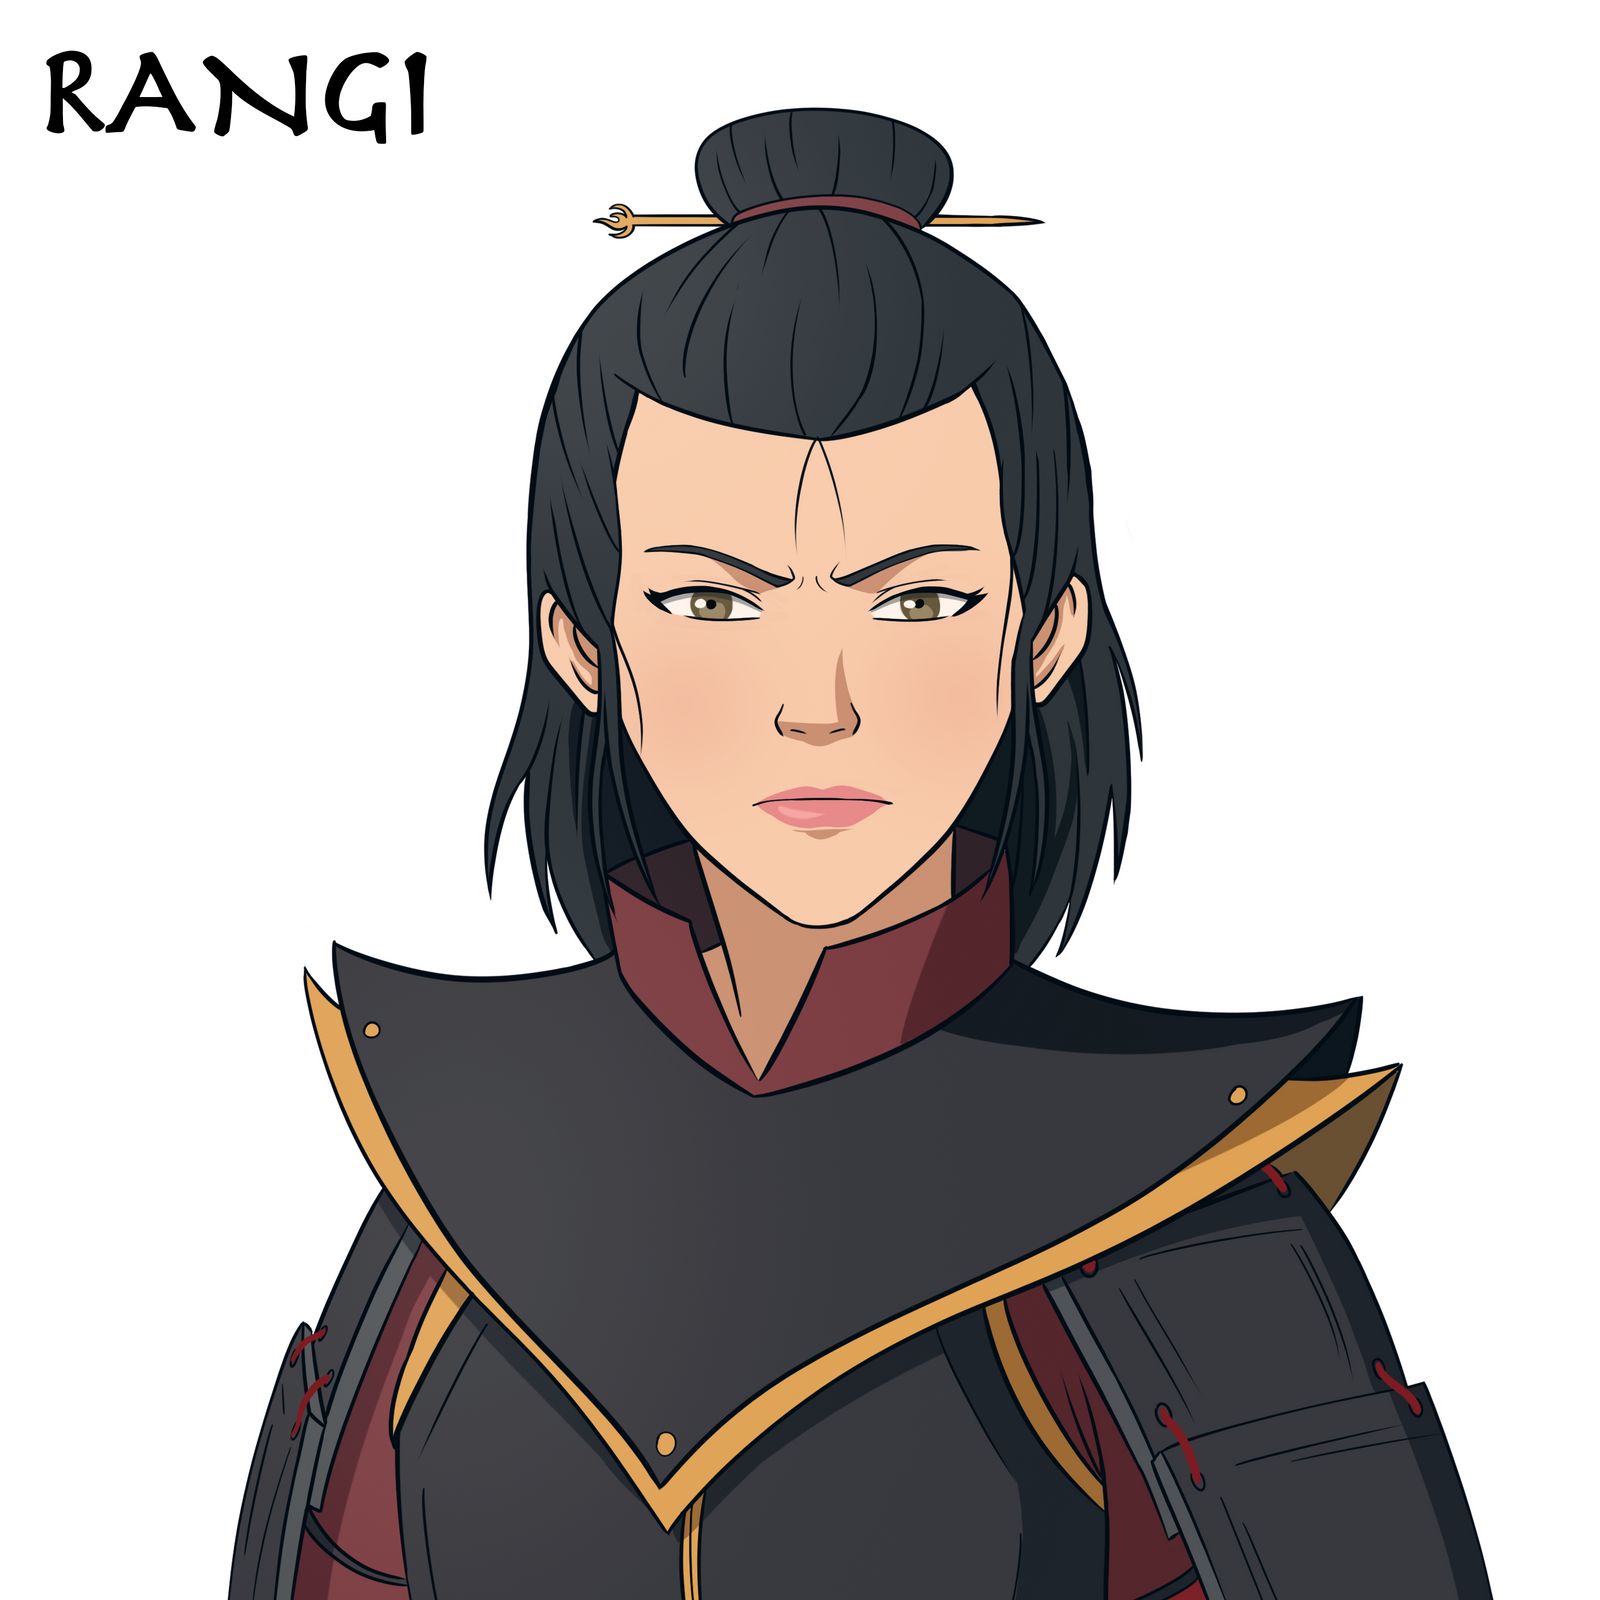 Rangi is the overall deuteragonist of the series Avatar: Kyoshi. 